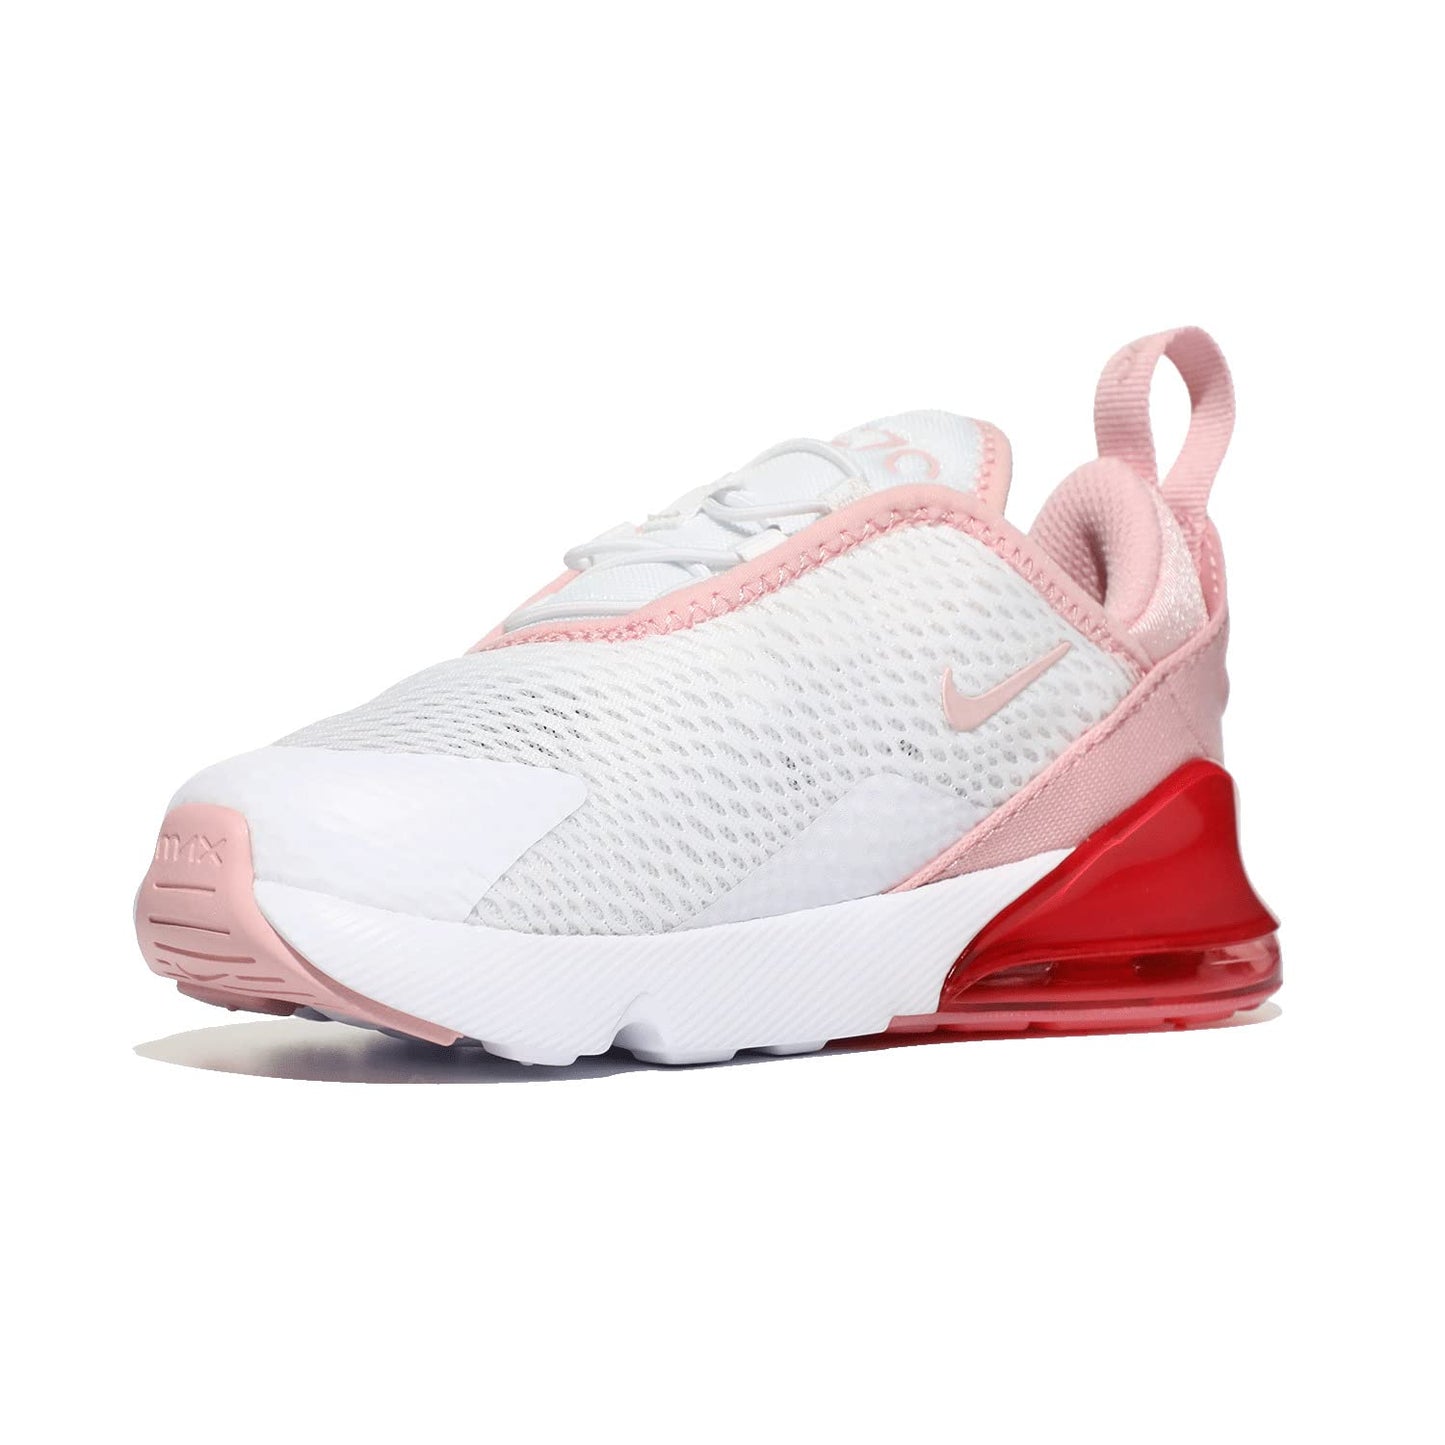 Image 2 of Air Max 270 (Infant/Toddler)